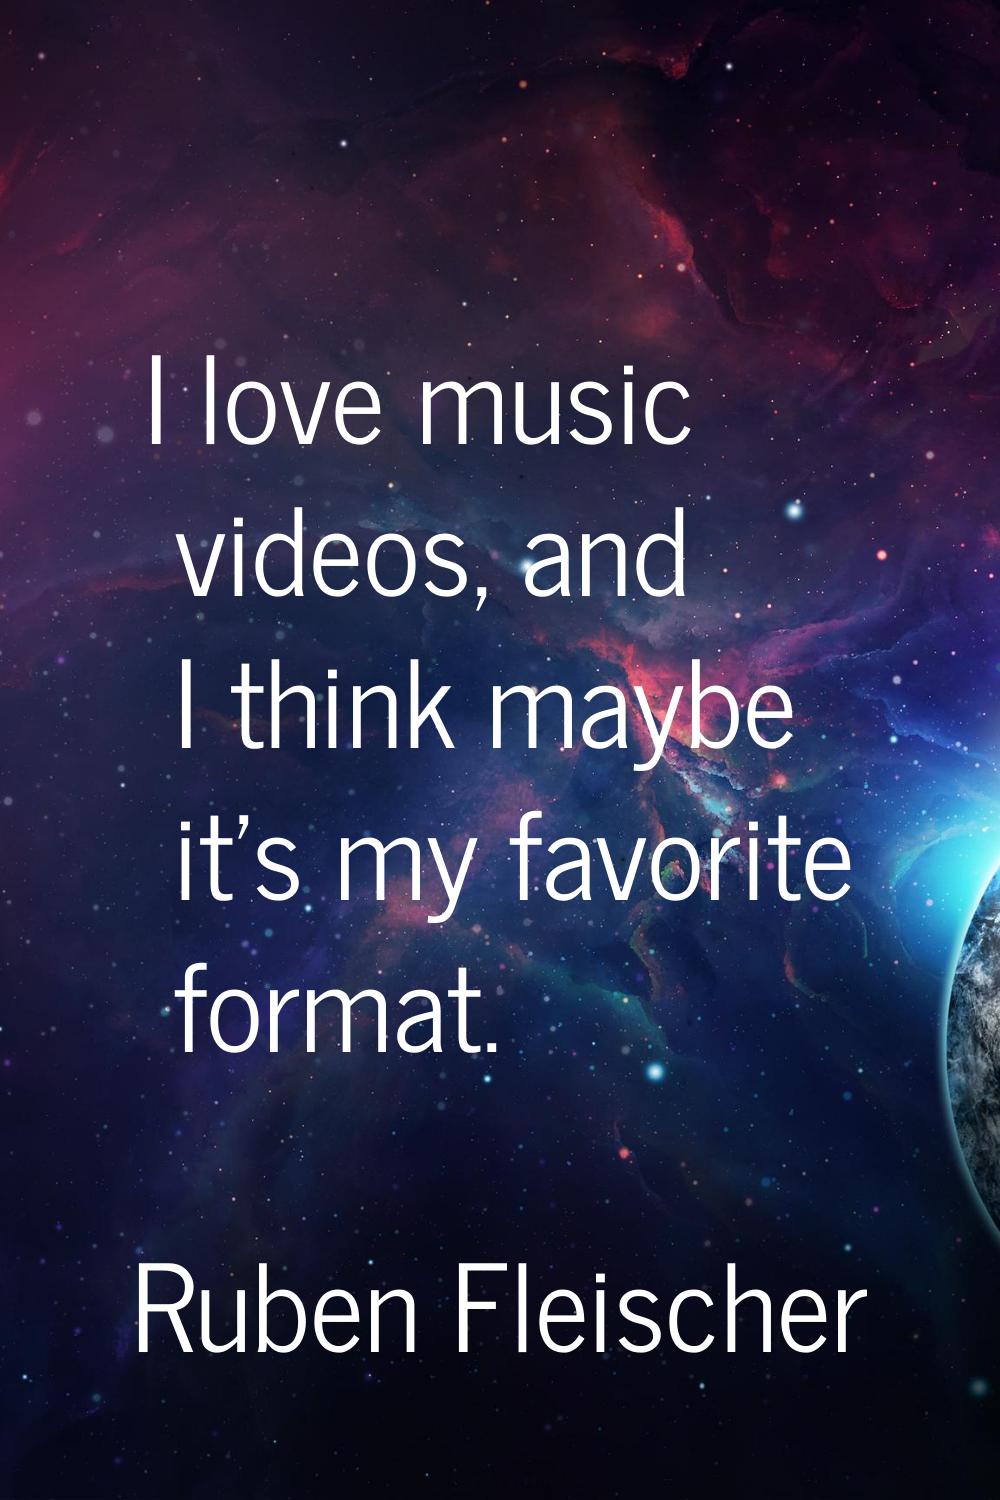 I love music videos, and I think maybe it's my favorite format.